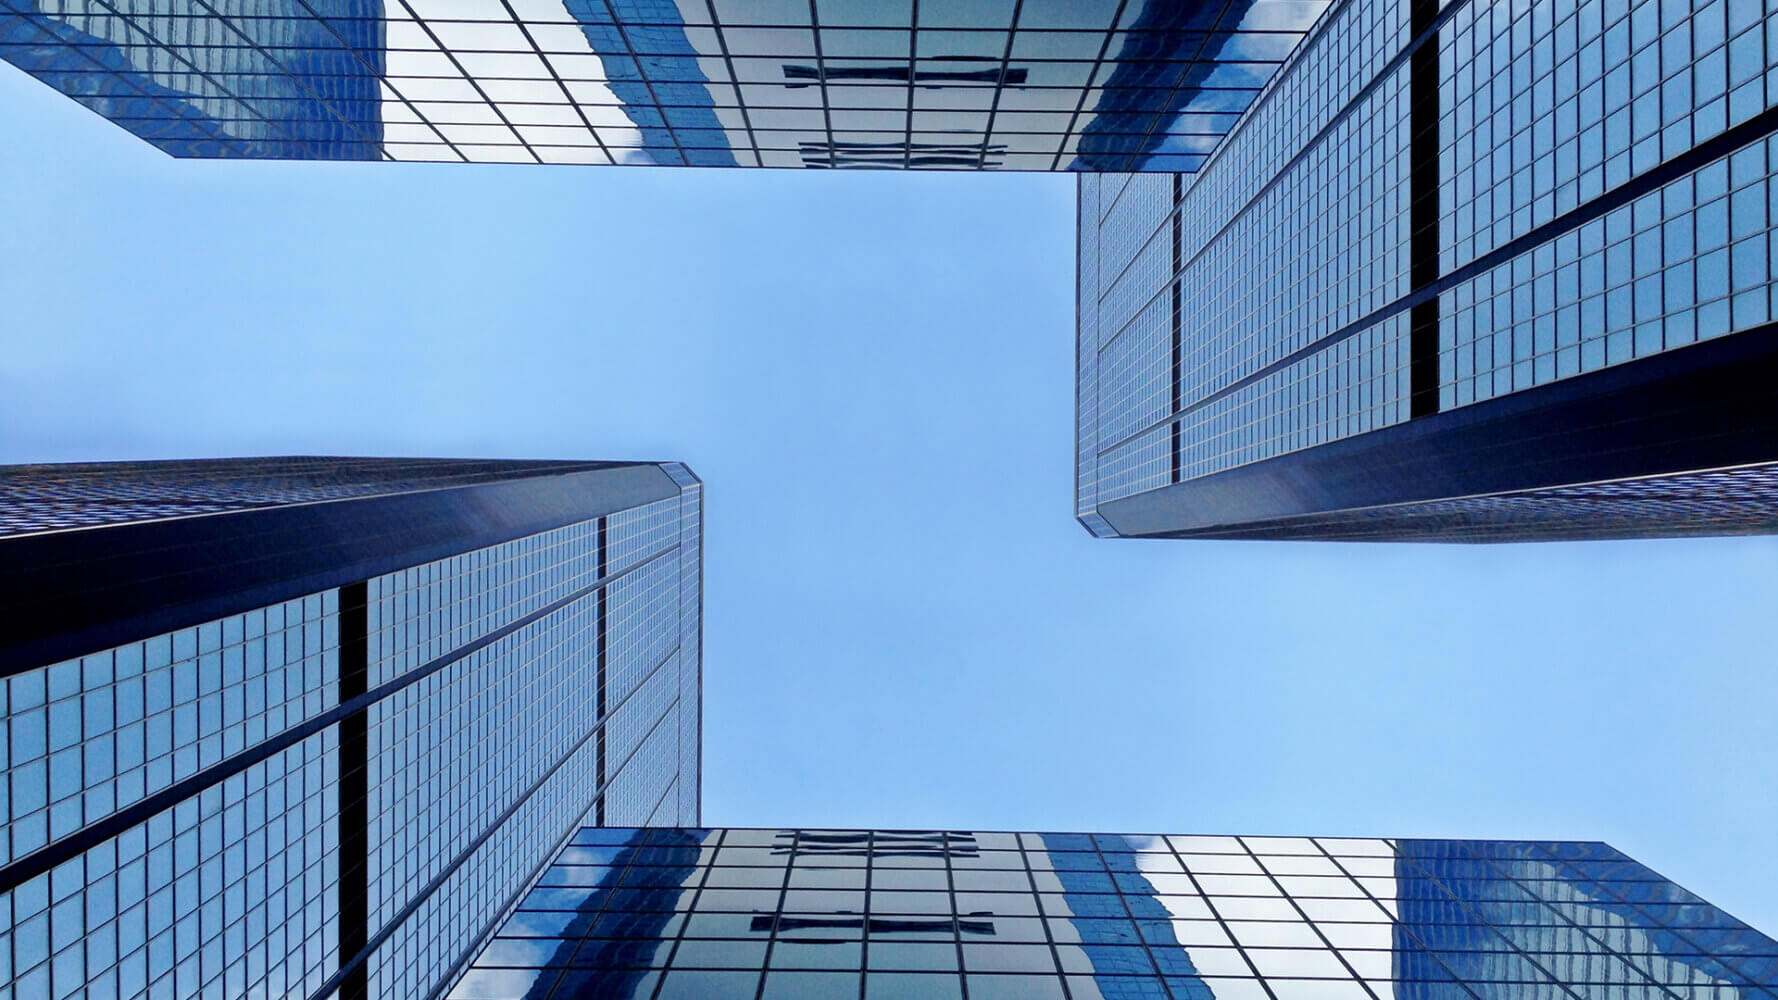 View from the ground looking up at office buildings